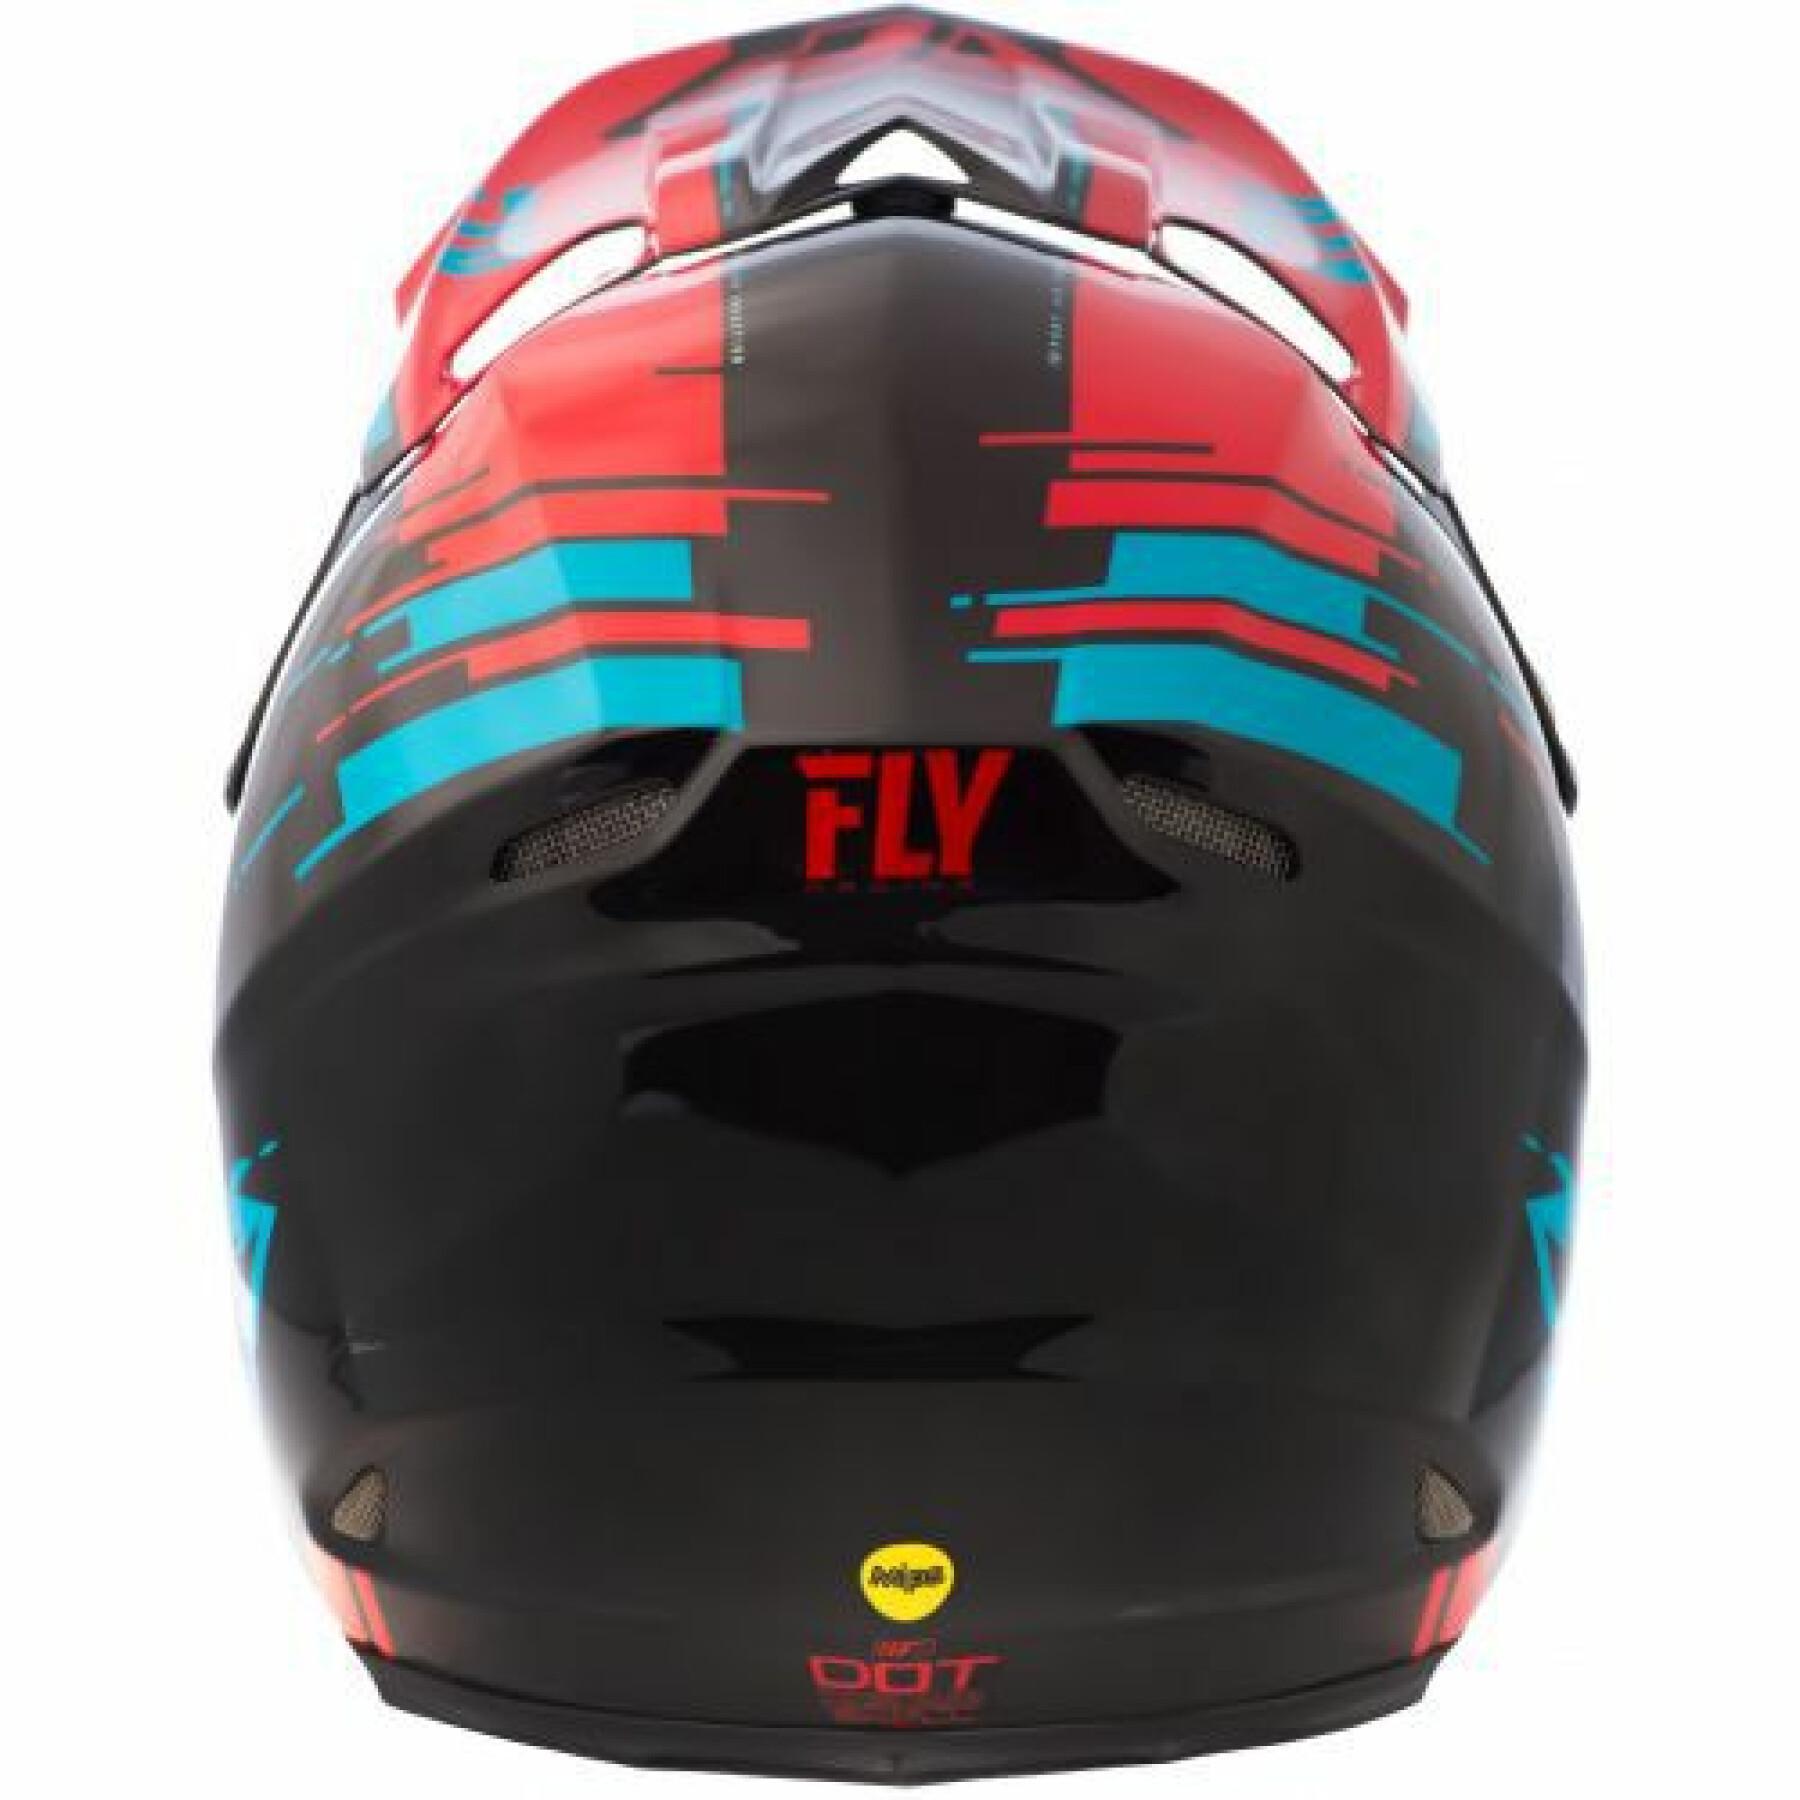 Fone de ouvido Fly Racing F2 Carbon Forge Mips 2018